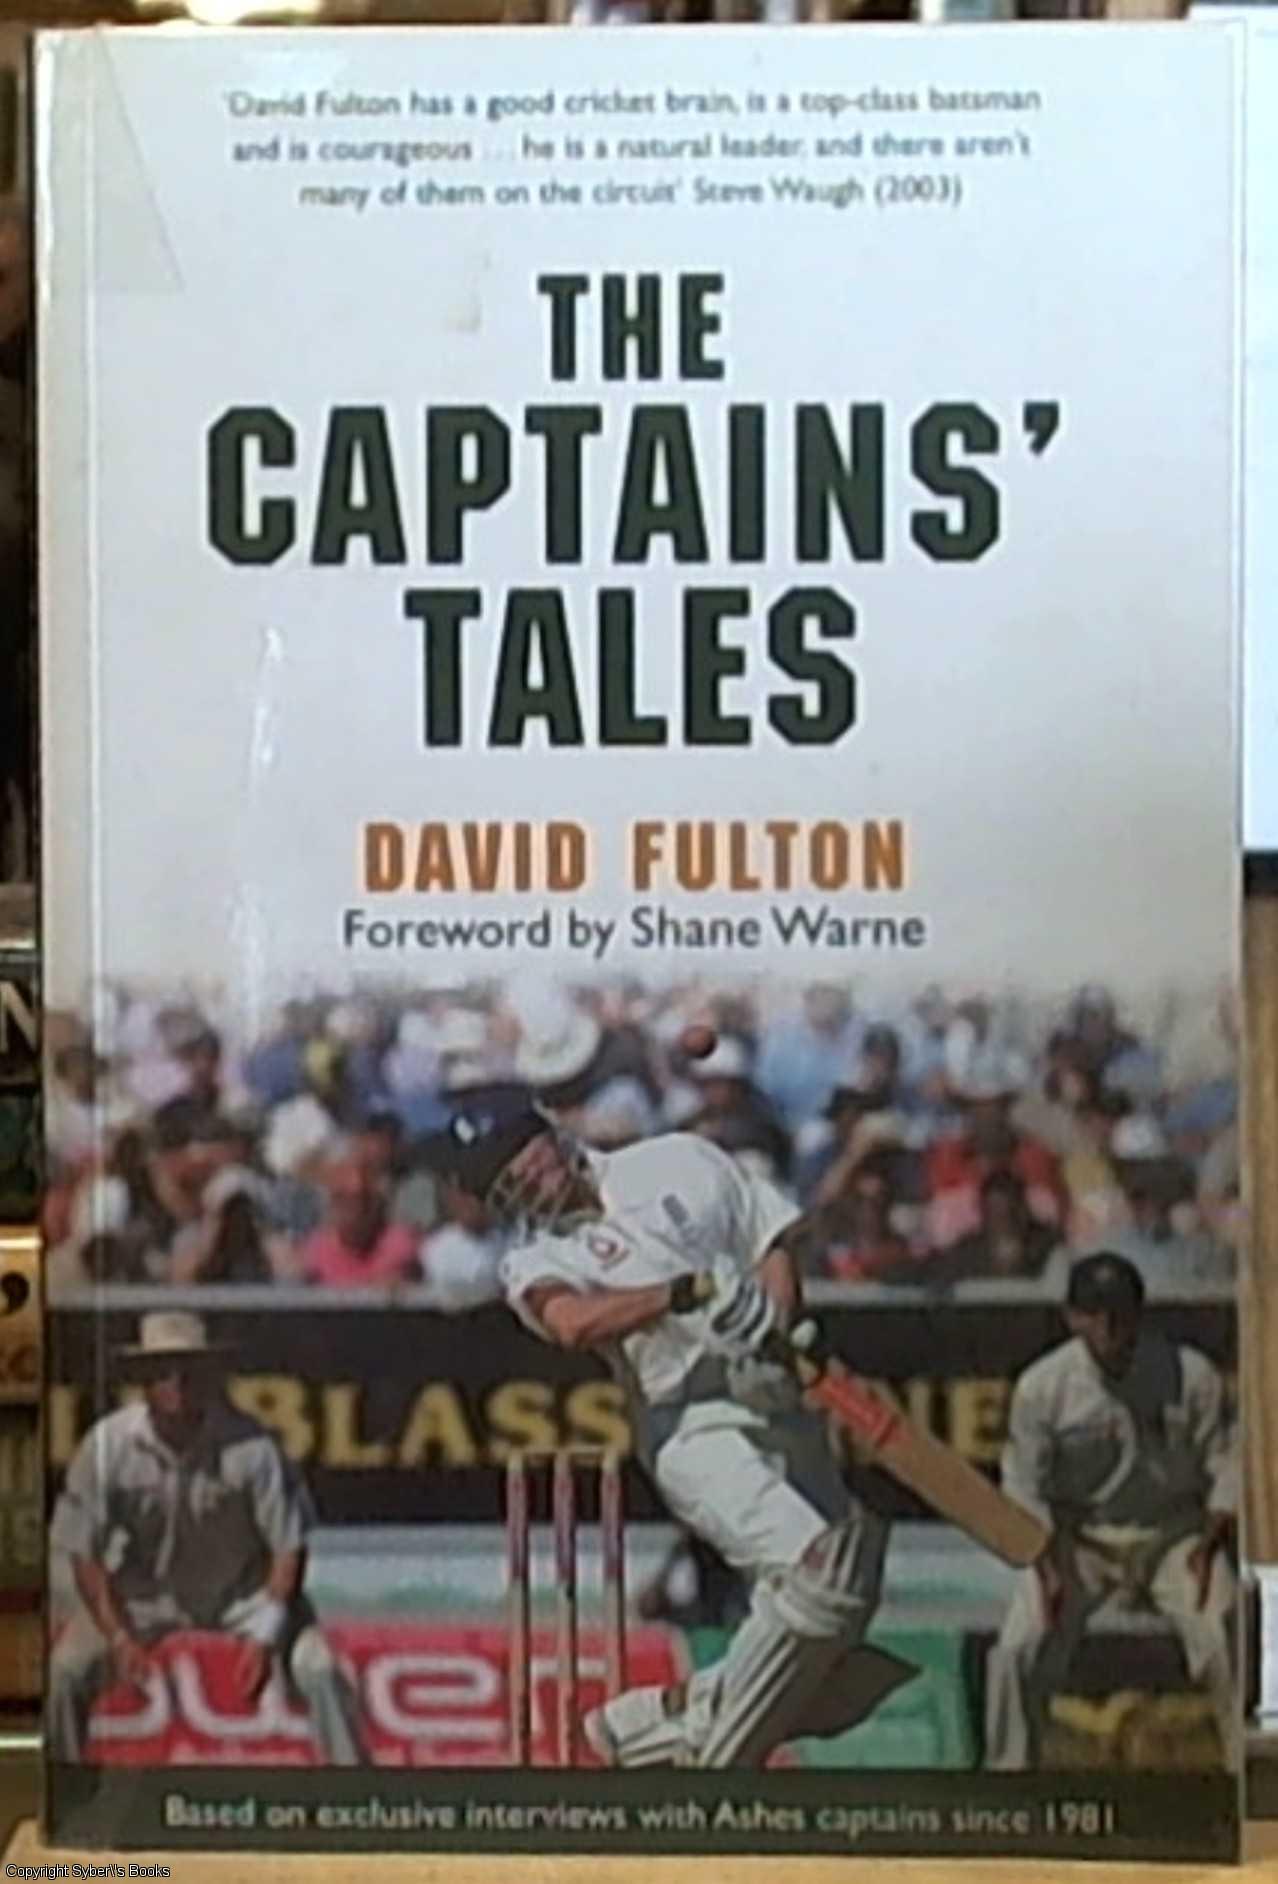 The Captains' Tales; Battle for the Ashes - Fulton, David